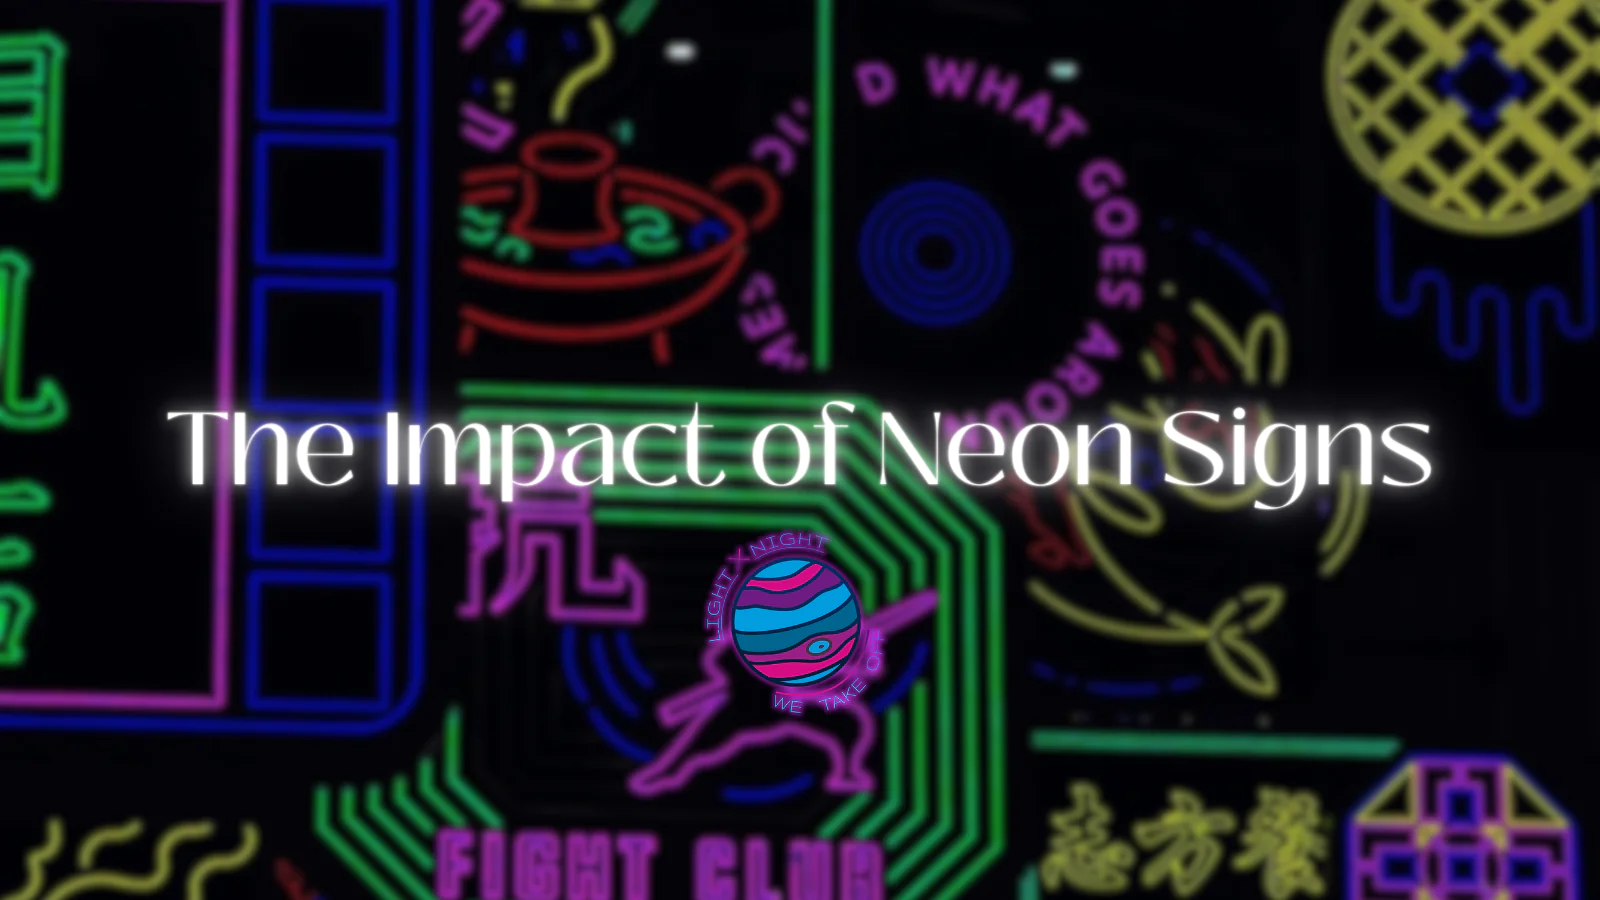 A title "The Impact of Neon Signs" superimposed over a backdrop of colorful, intricate neon sign designs, symbolizing the vivid and expressive influence of neon lighting in visual culture.